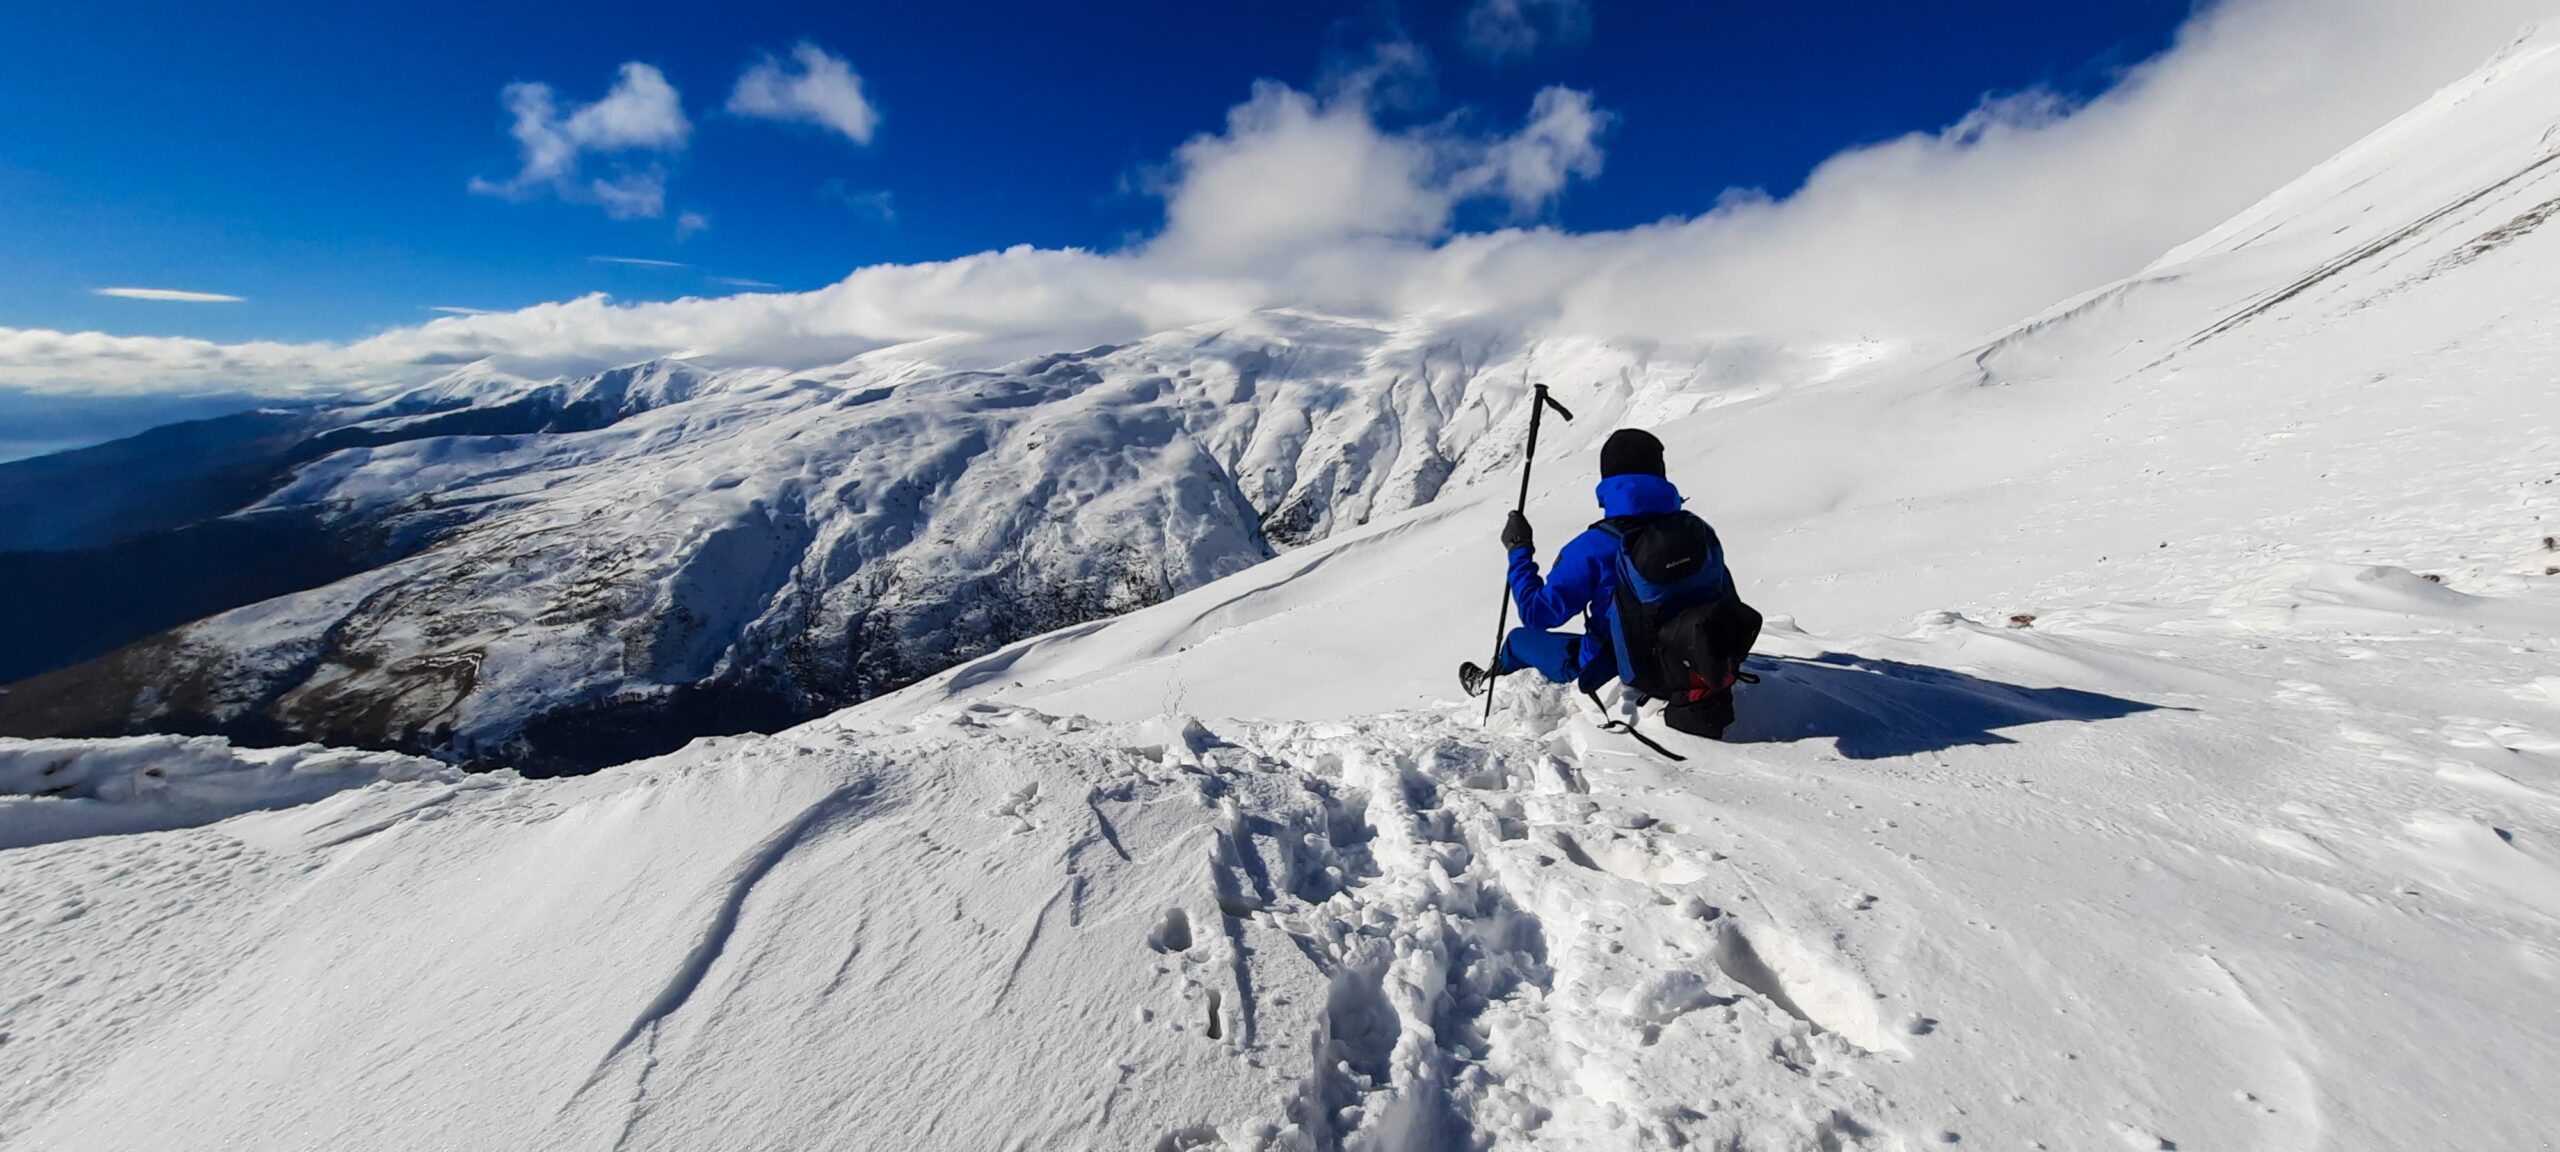 A person in a blue jacket and black pants on a snow-covered-mountain